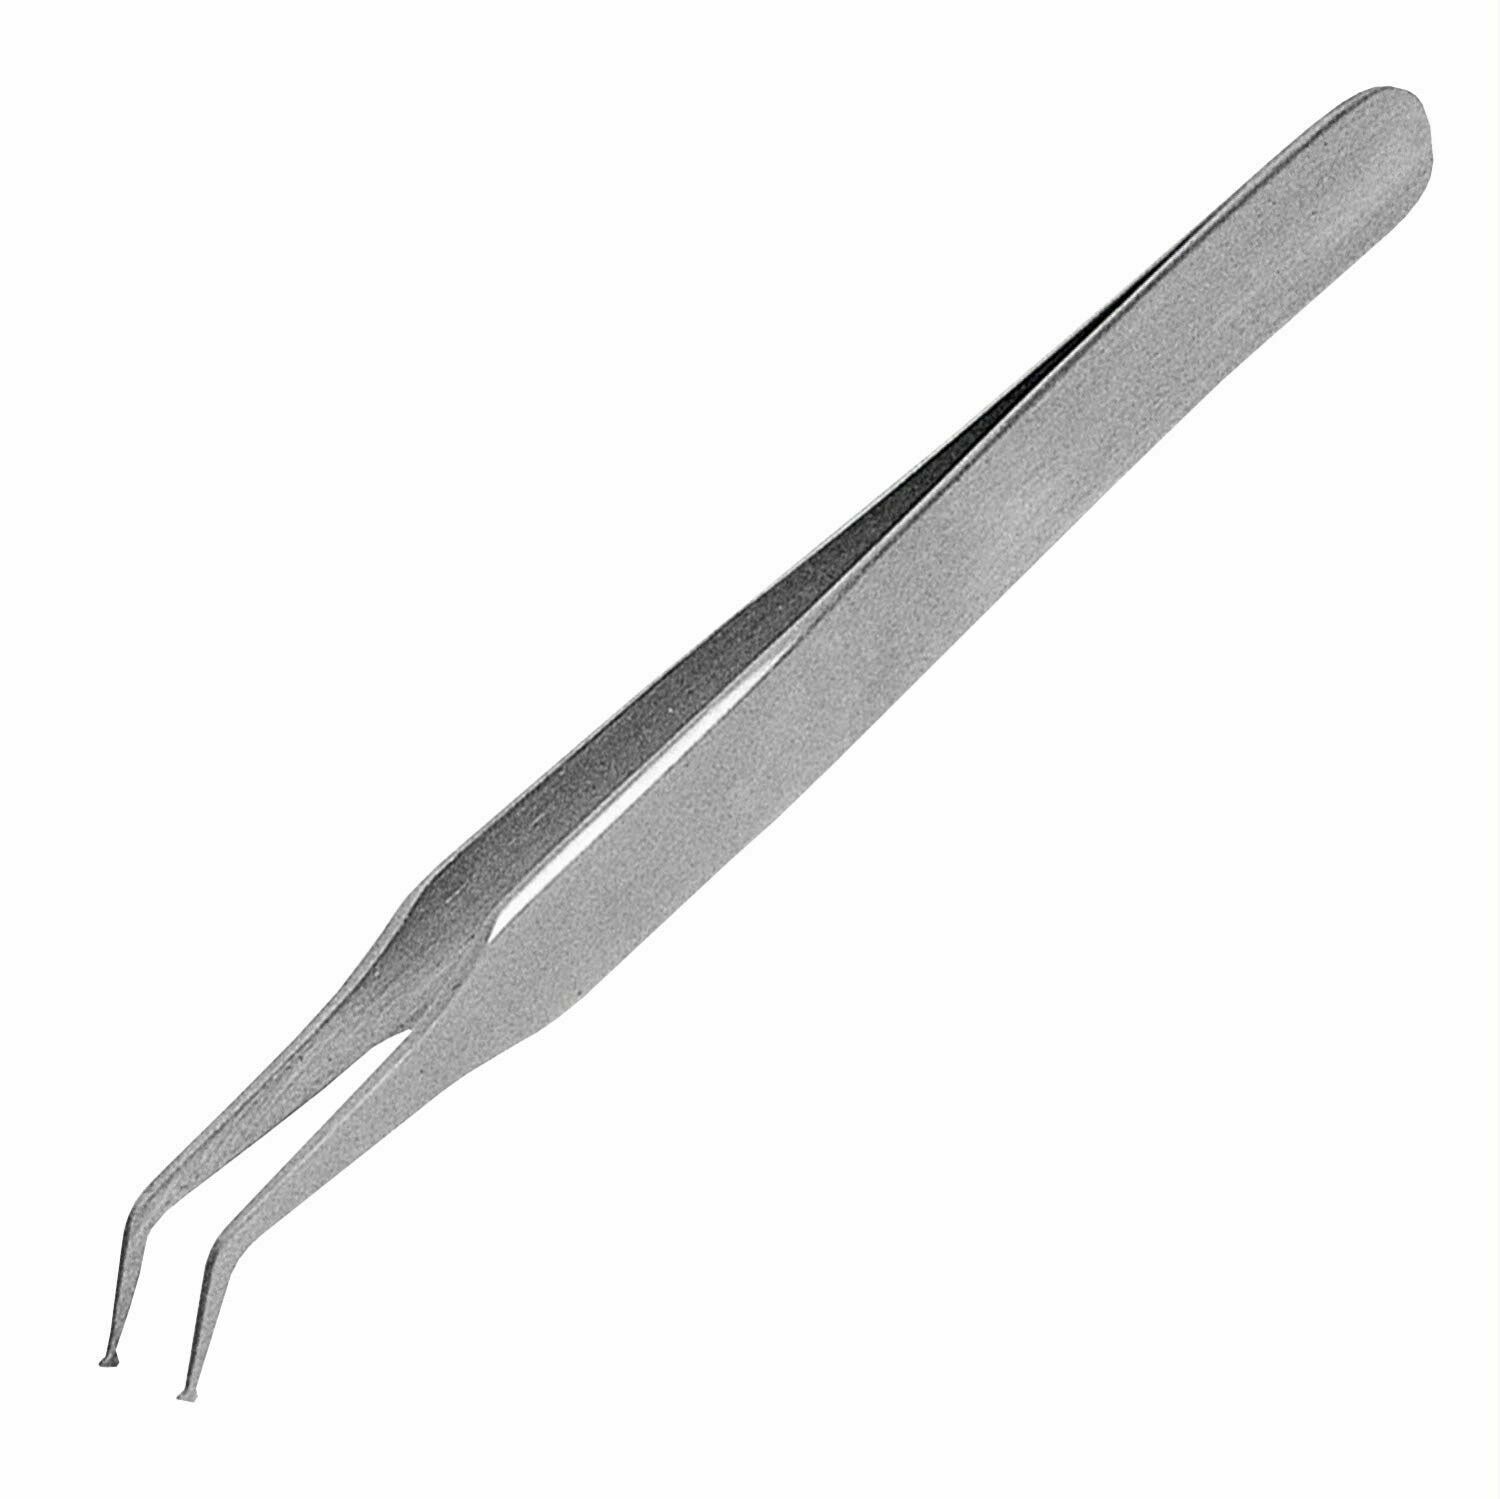 Engineer Smd Tip Tweezers Stainless Body (120mm) Pt-23